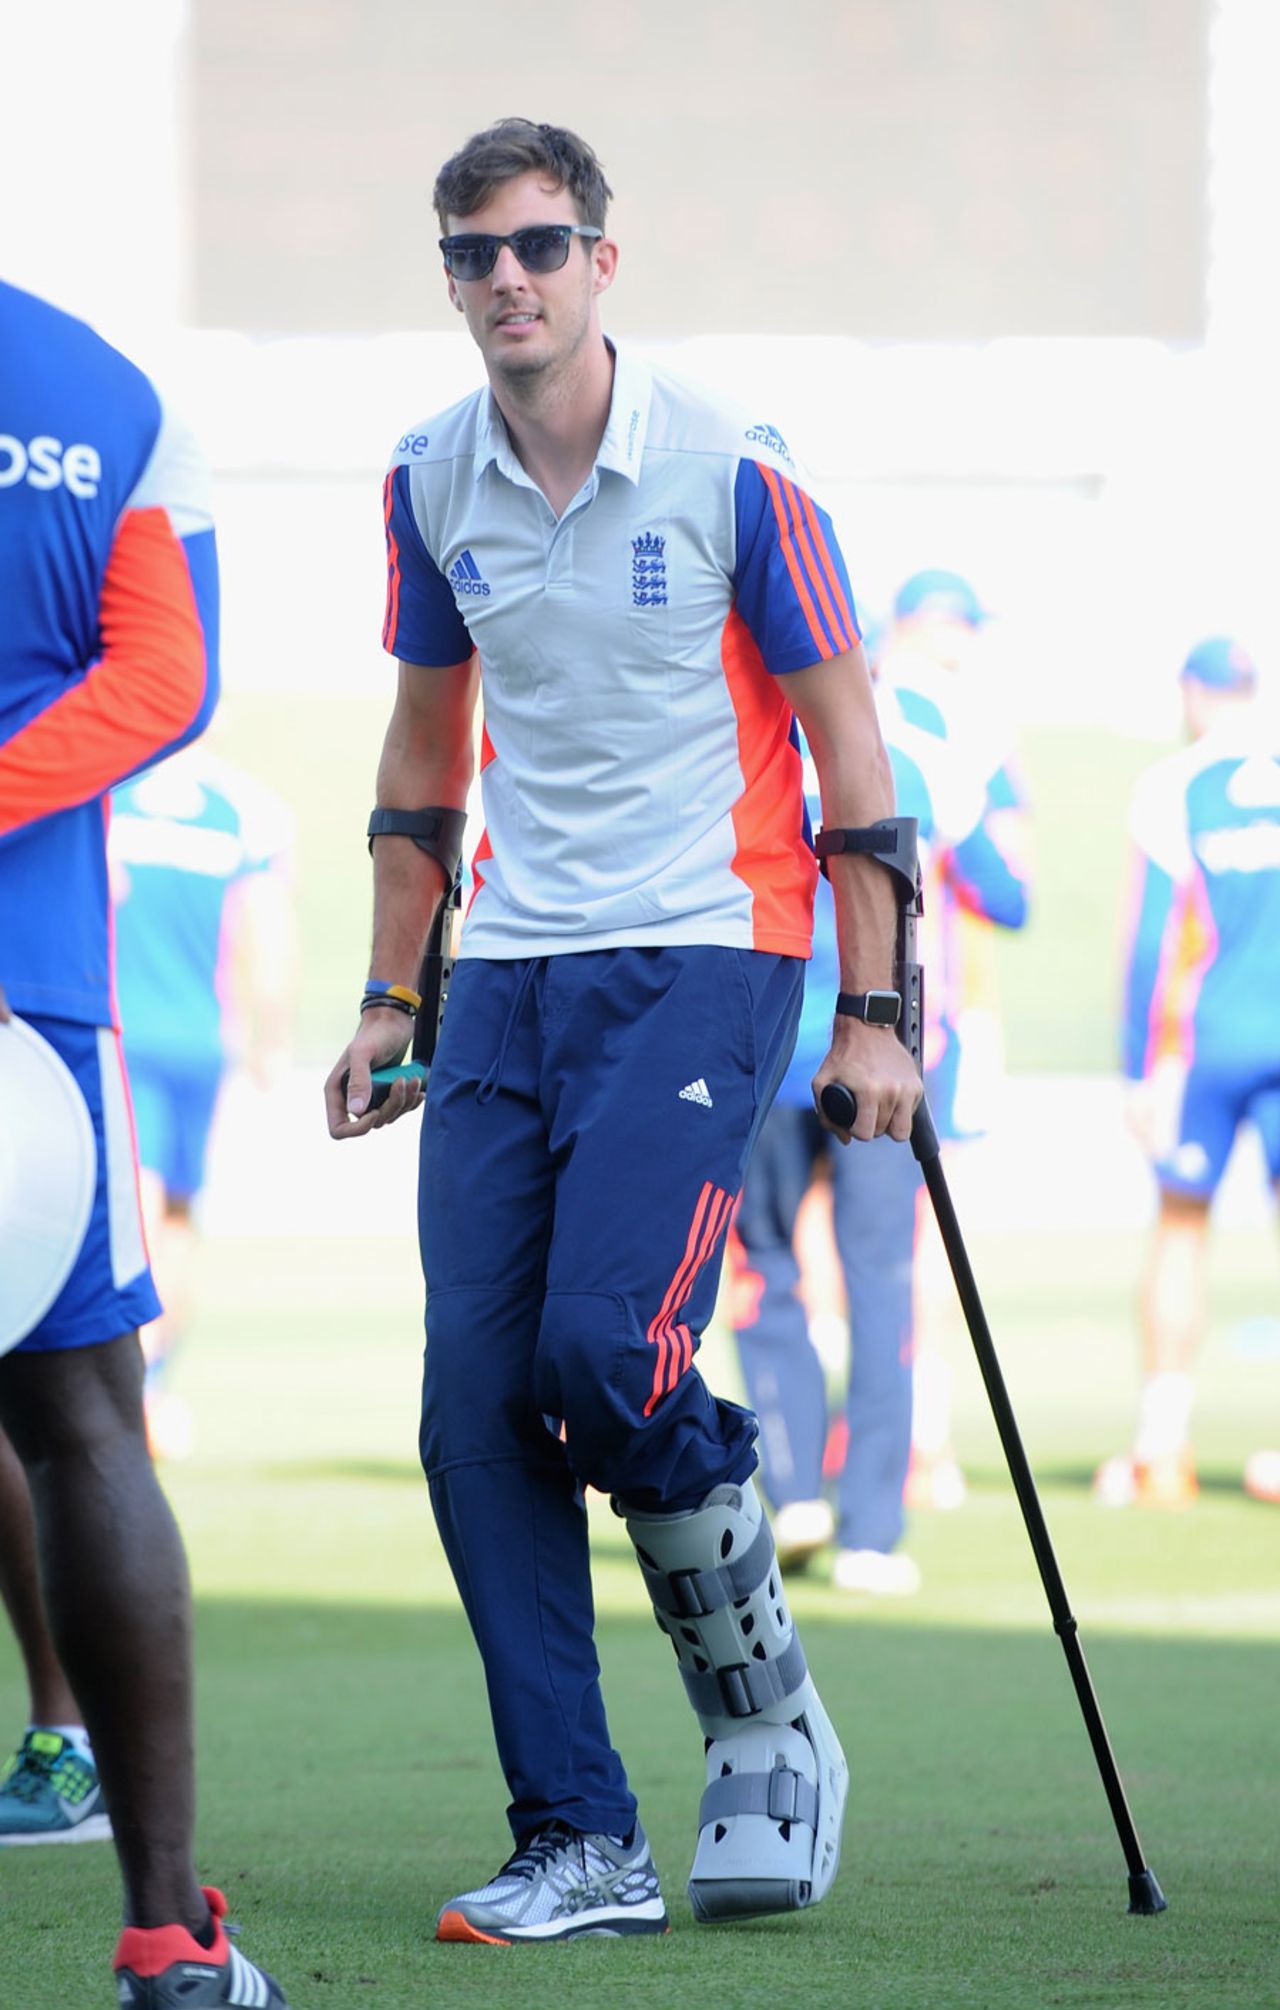 Steven Finn was wearing a protective boot on his injured foot, Pakistan v England, 1st Test, Abu Dhabi, 1st day, October 13, 2015